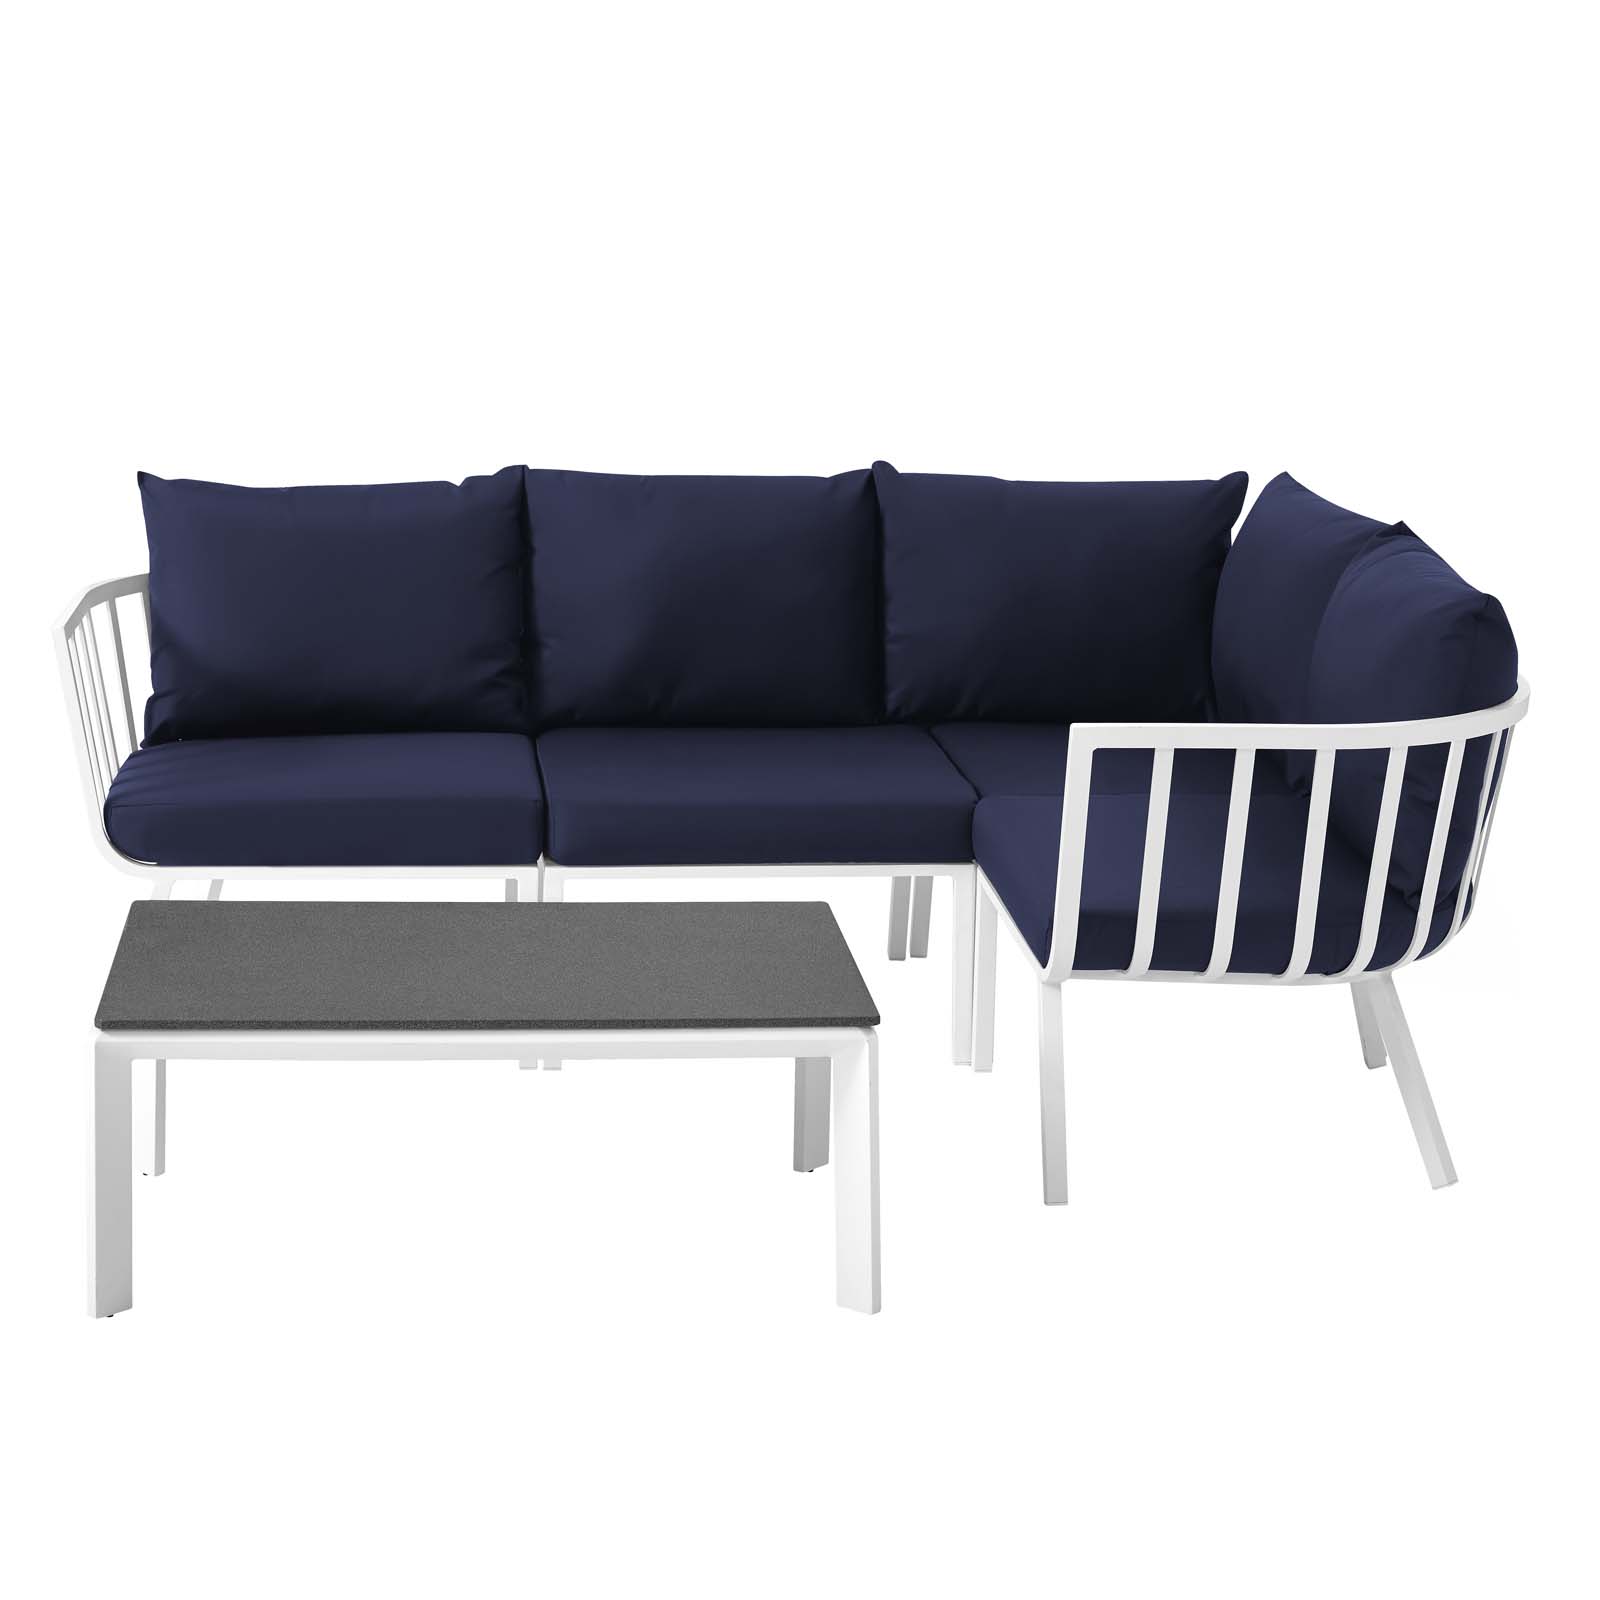 Lounge Sectional Sofa Chair Set, Aluminum, Metal, Steel, White Blue Navy, Modern Contemporary Urban Design, Outdoor Patio Balcony Cafe Bistro Garden Furniture Hotel Hospitality - image 1 of 10